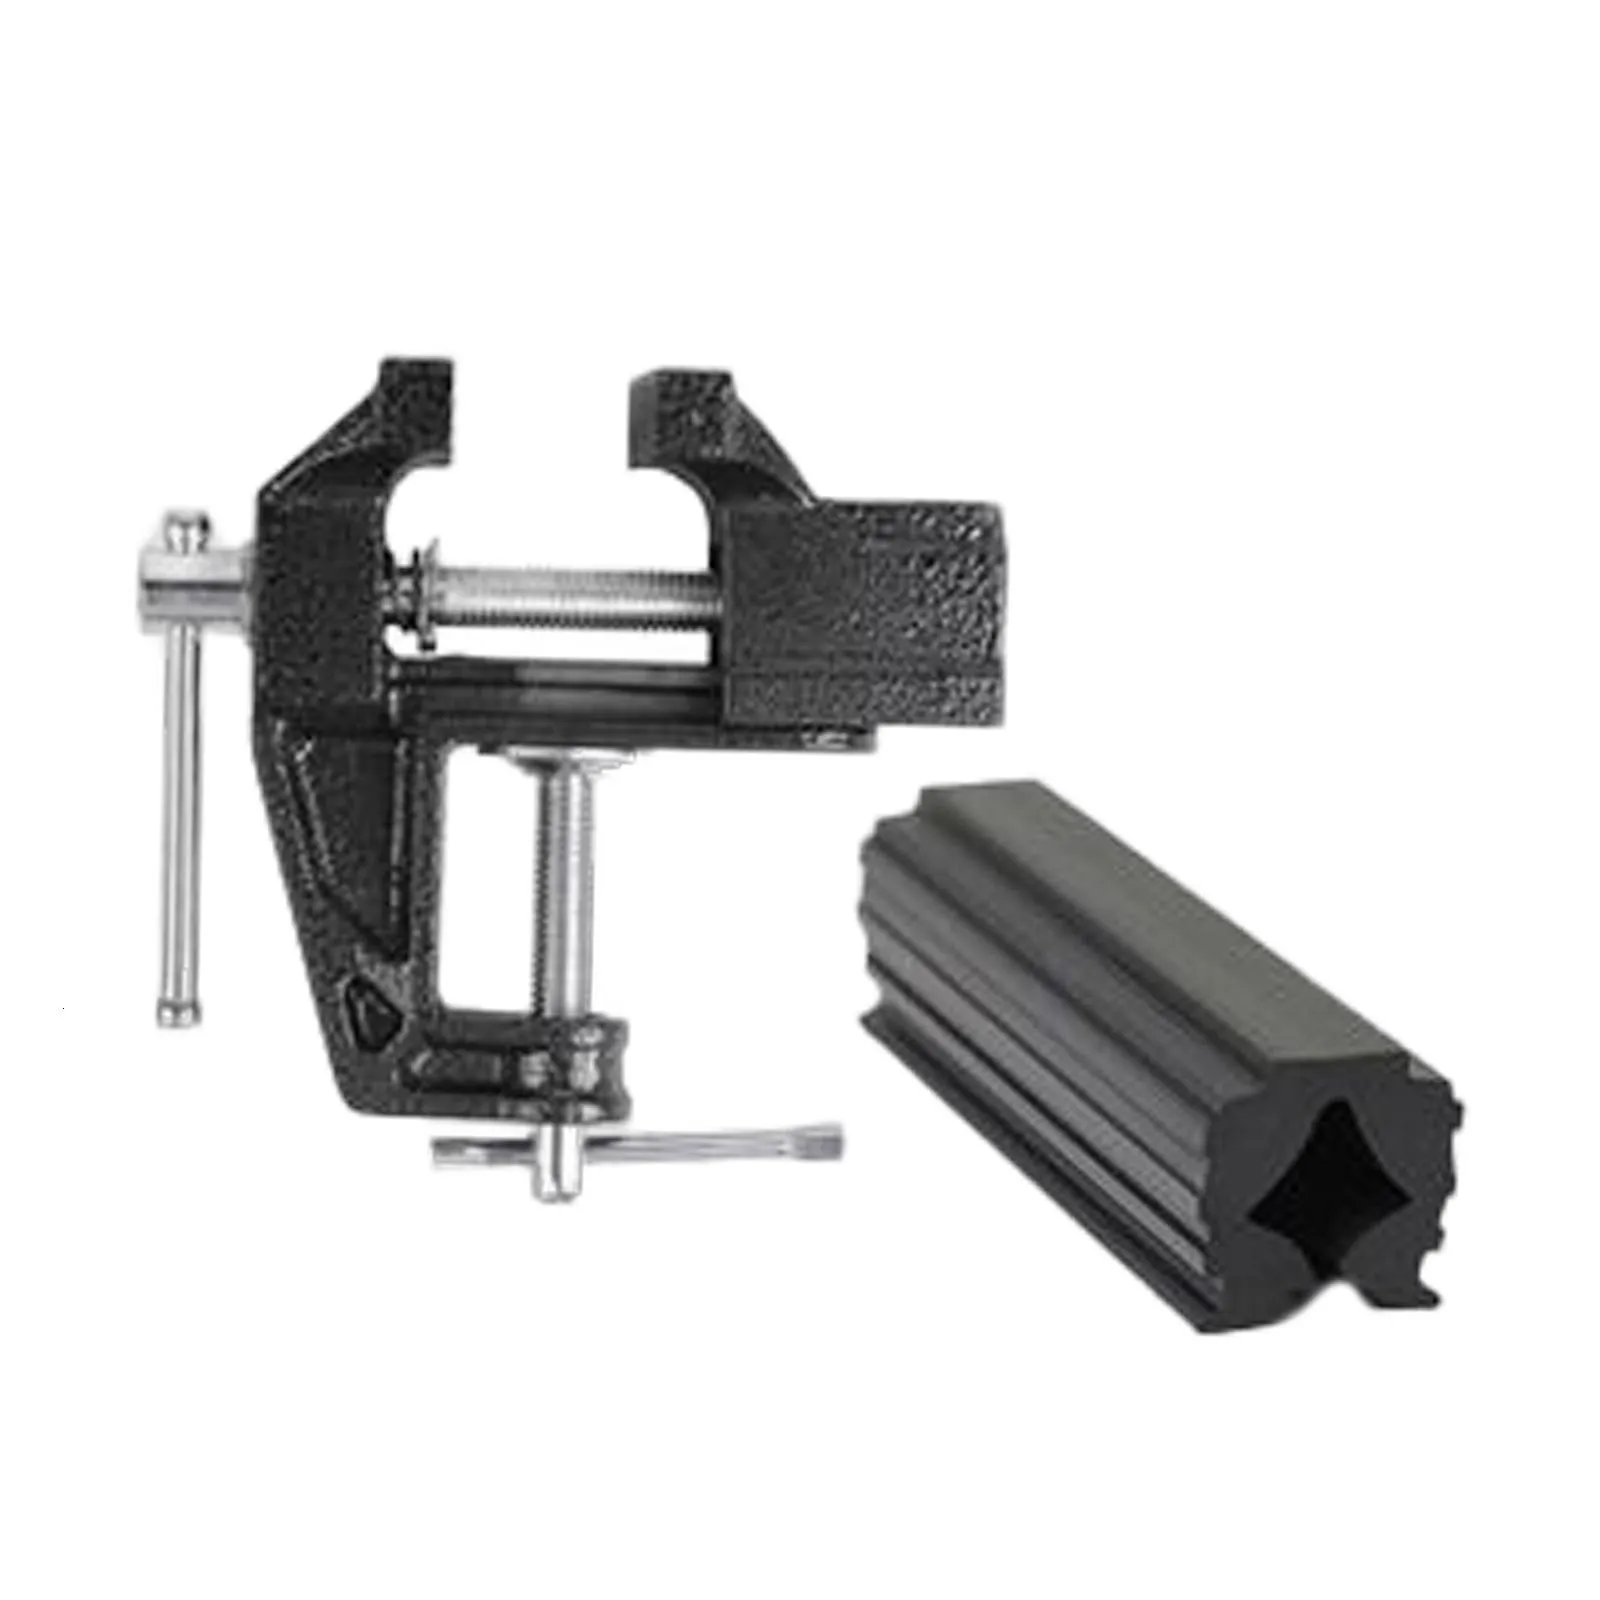 Universal Vise Clamp for Golf Club Protector Holder Fixture Fittings Repair